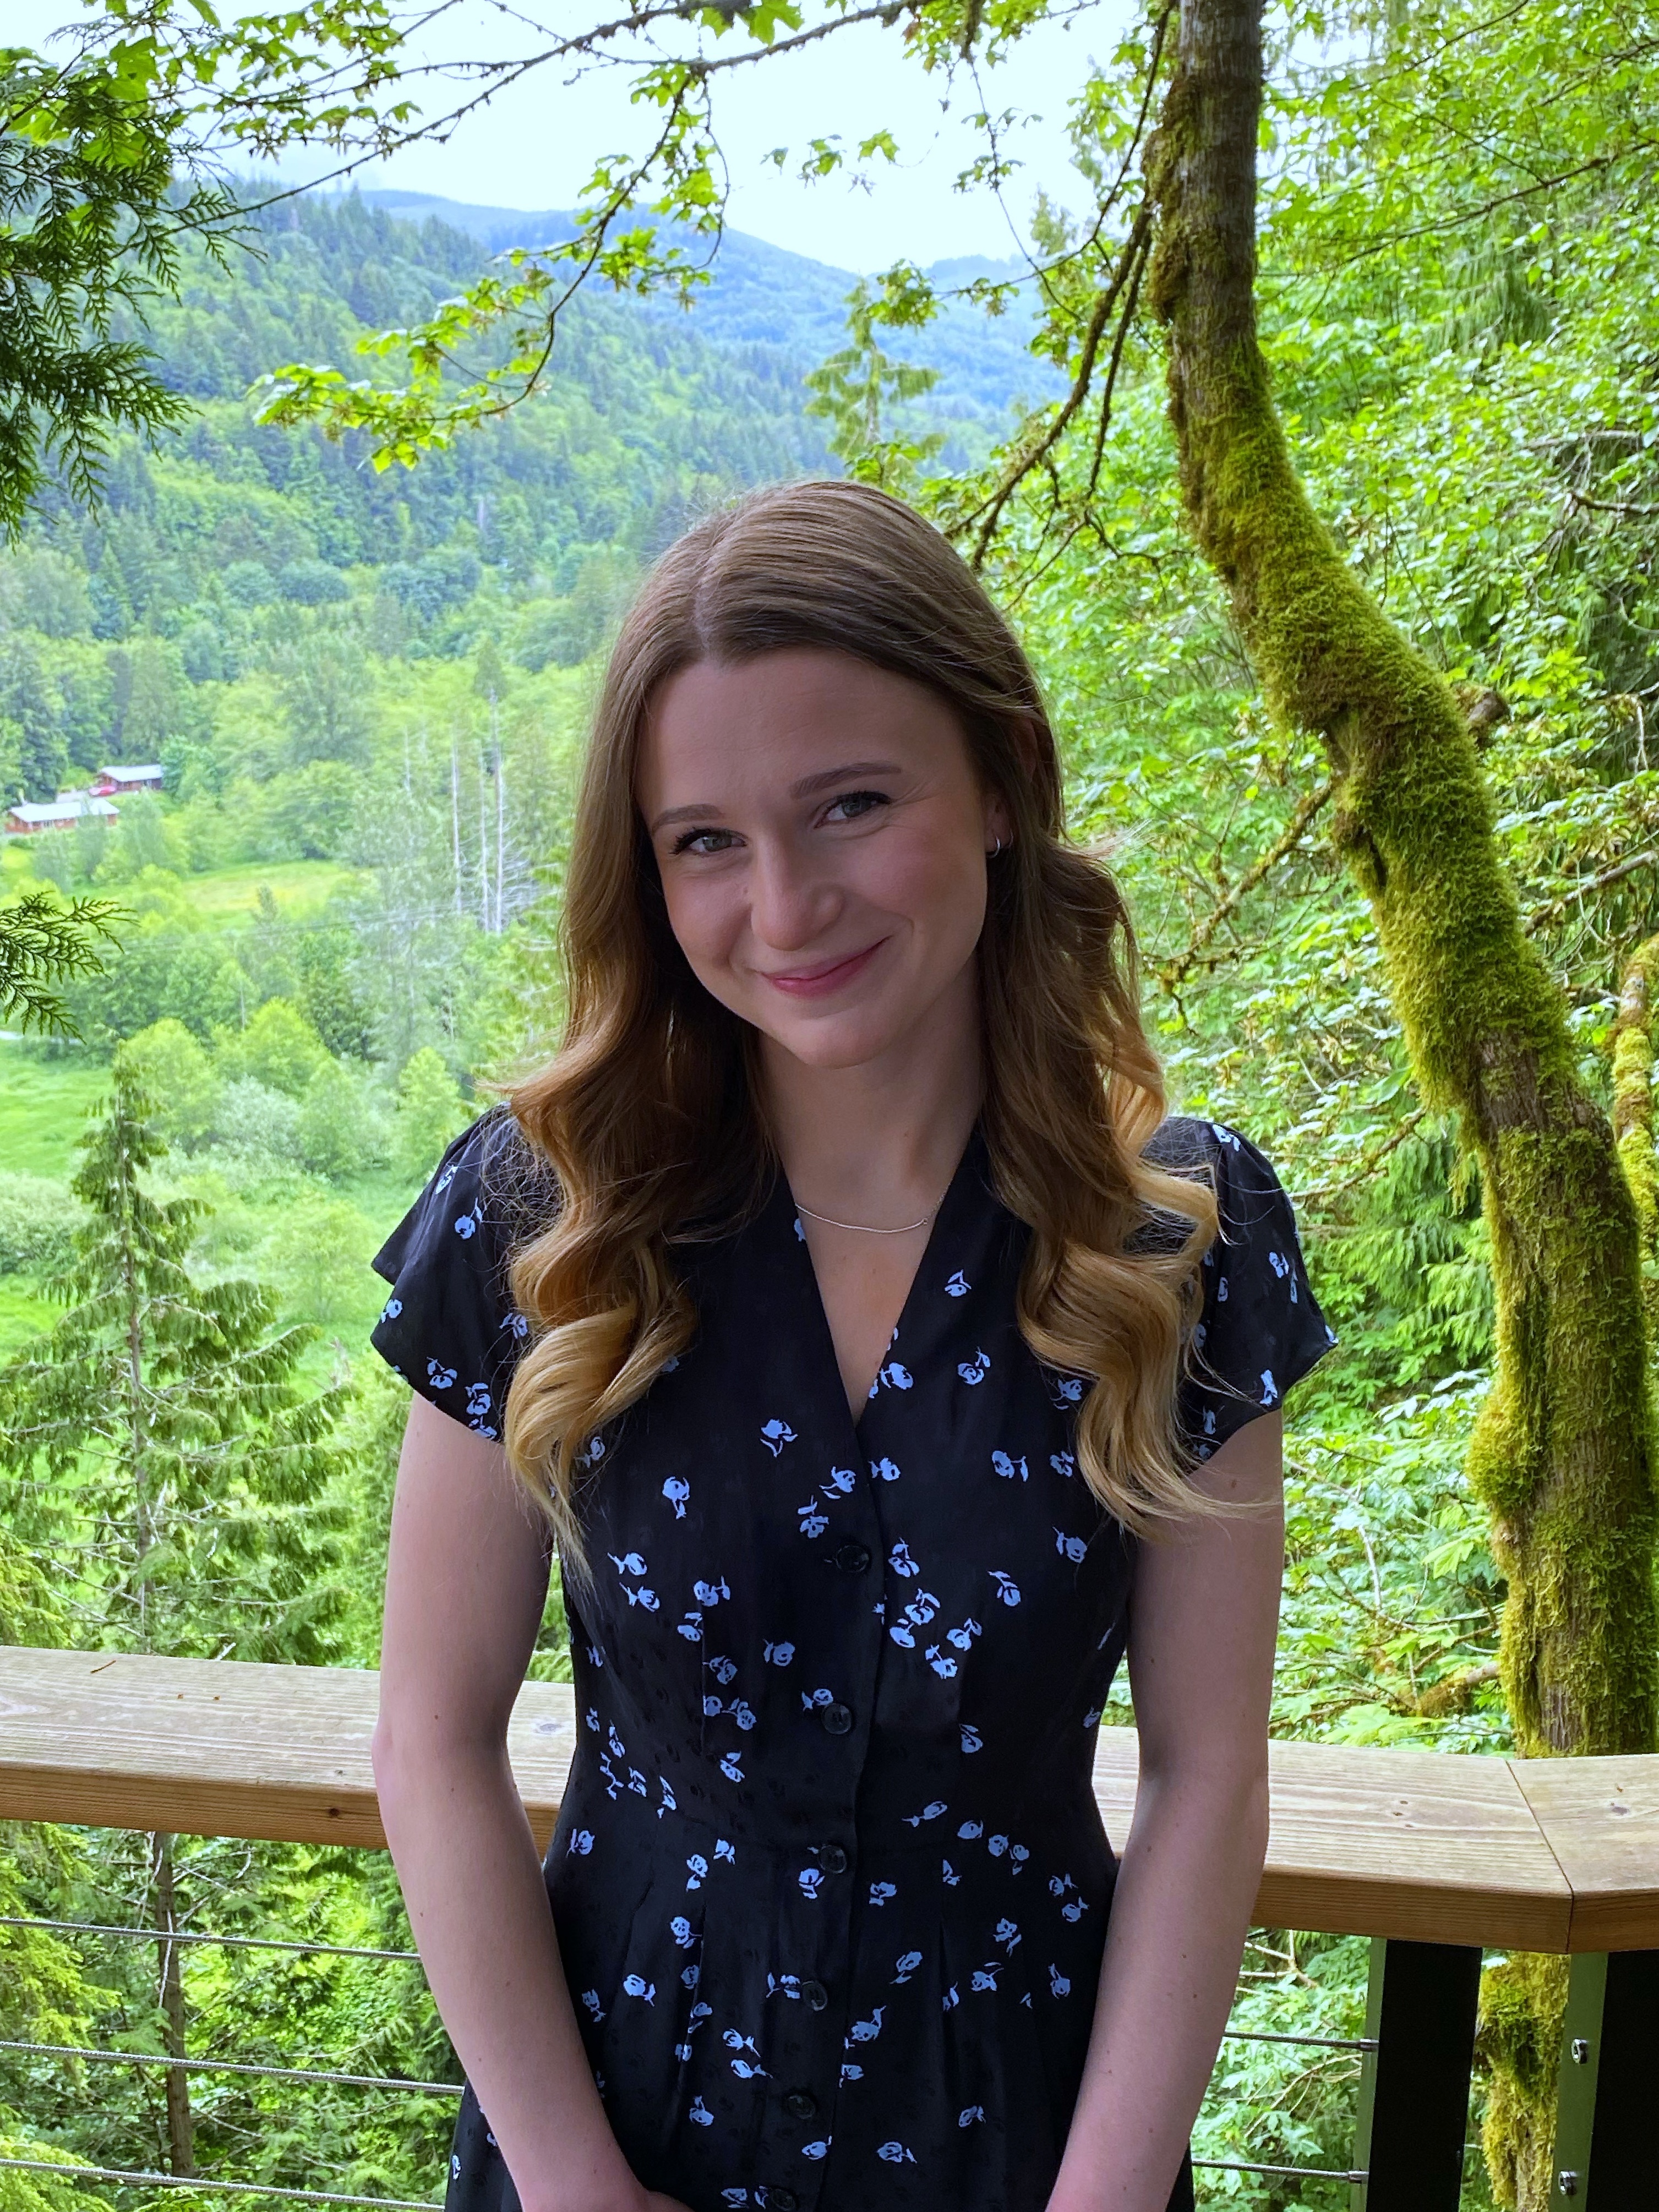 WWU outstanding graduate student Kyllie Gliessman smiling with greenery in the backgroudn